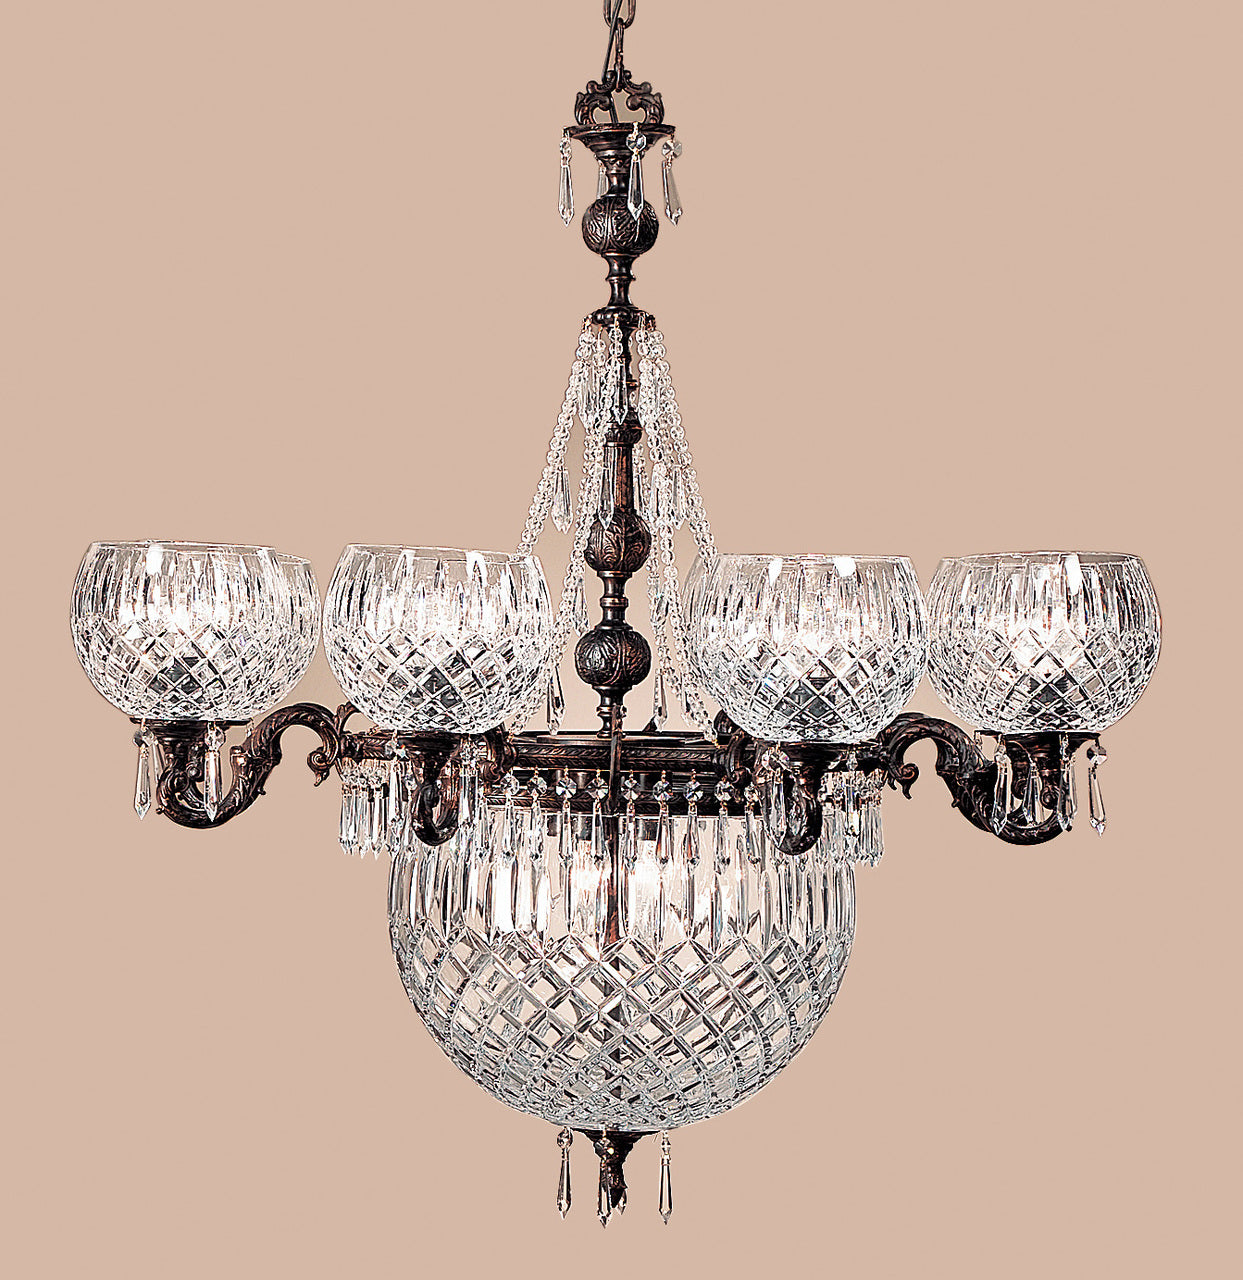 Classic Lighting 55538 OX CP Waterbury Cast Brass/Lead Crystal Chandelier in Oxidized Bronze (Imported from Spain)